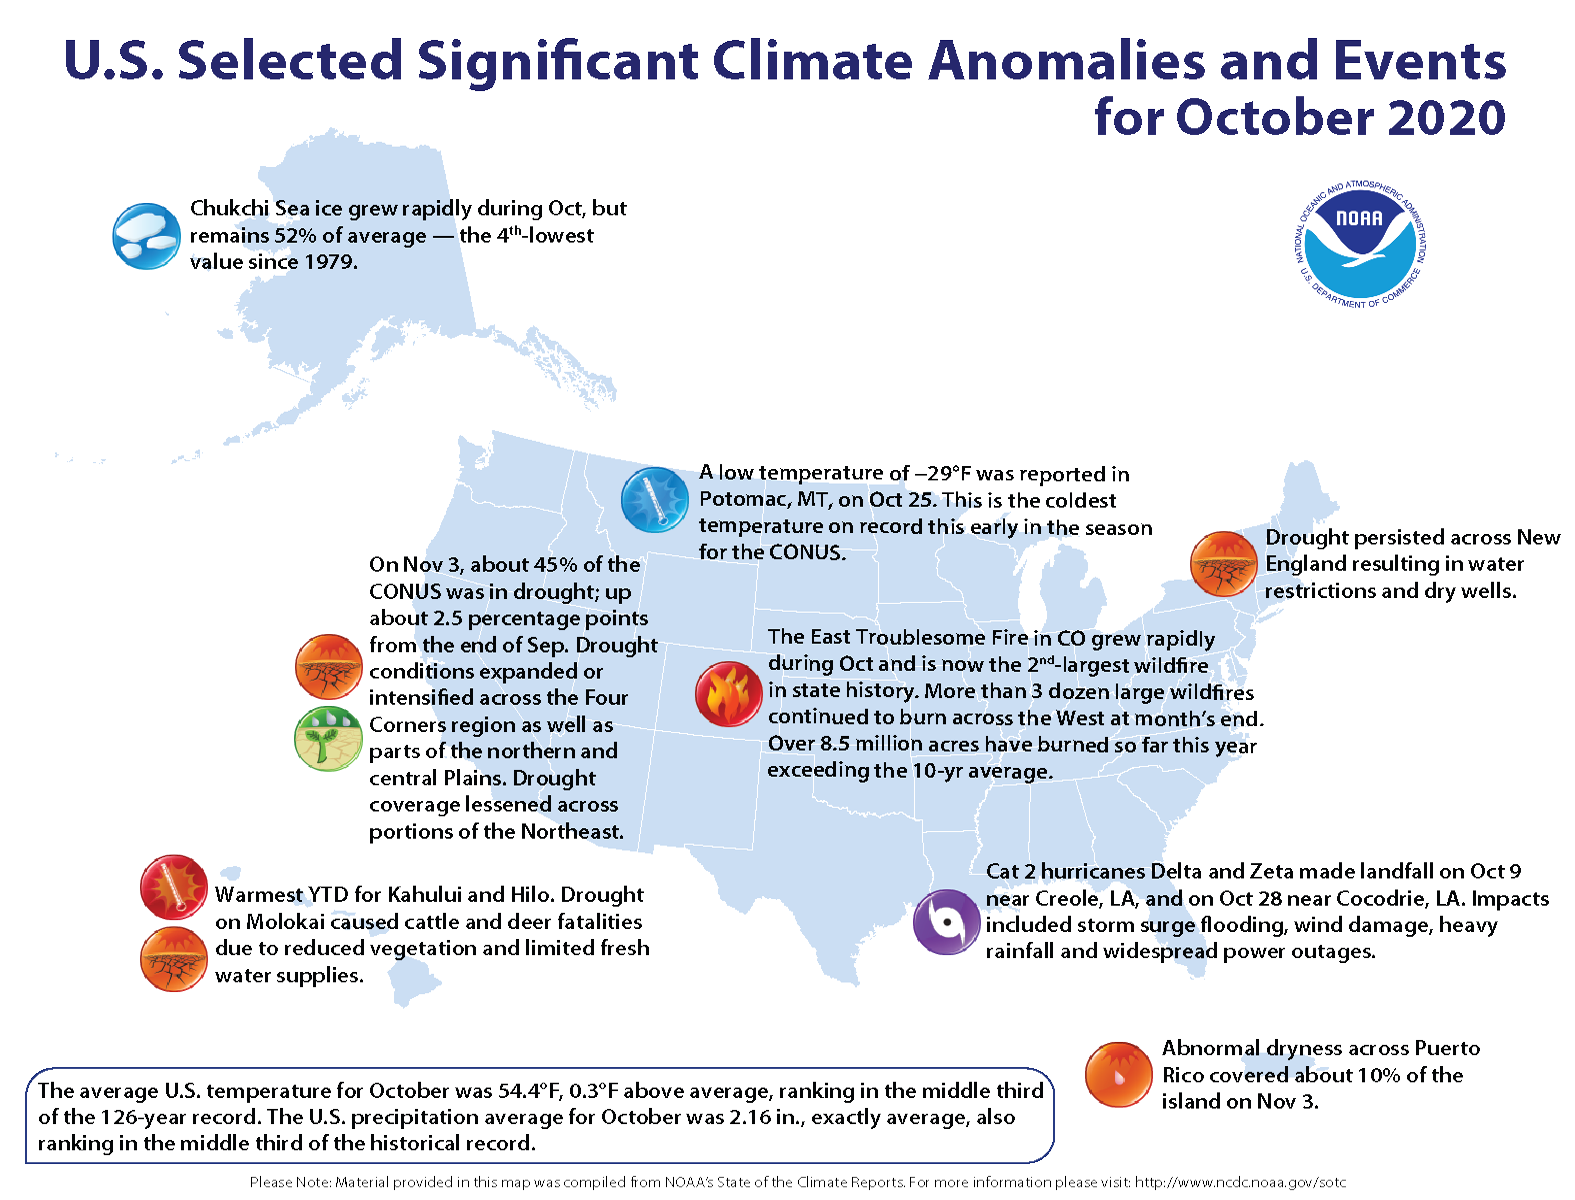 An annotated map of the United States showing notable climate and weather events that occurred across the country during October 2020. For text details, please visit http://bit.ly/USClimate202010.